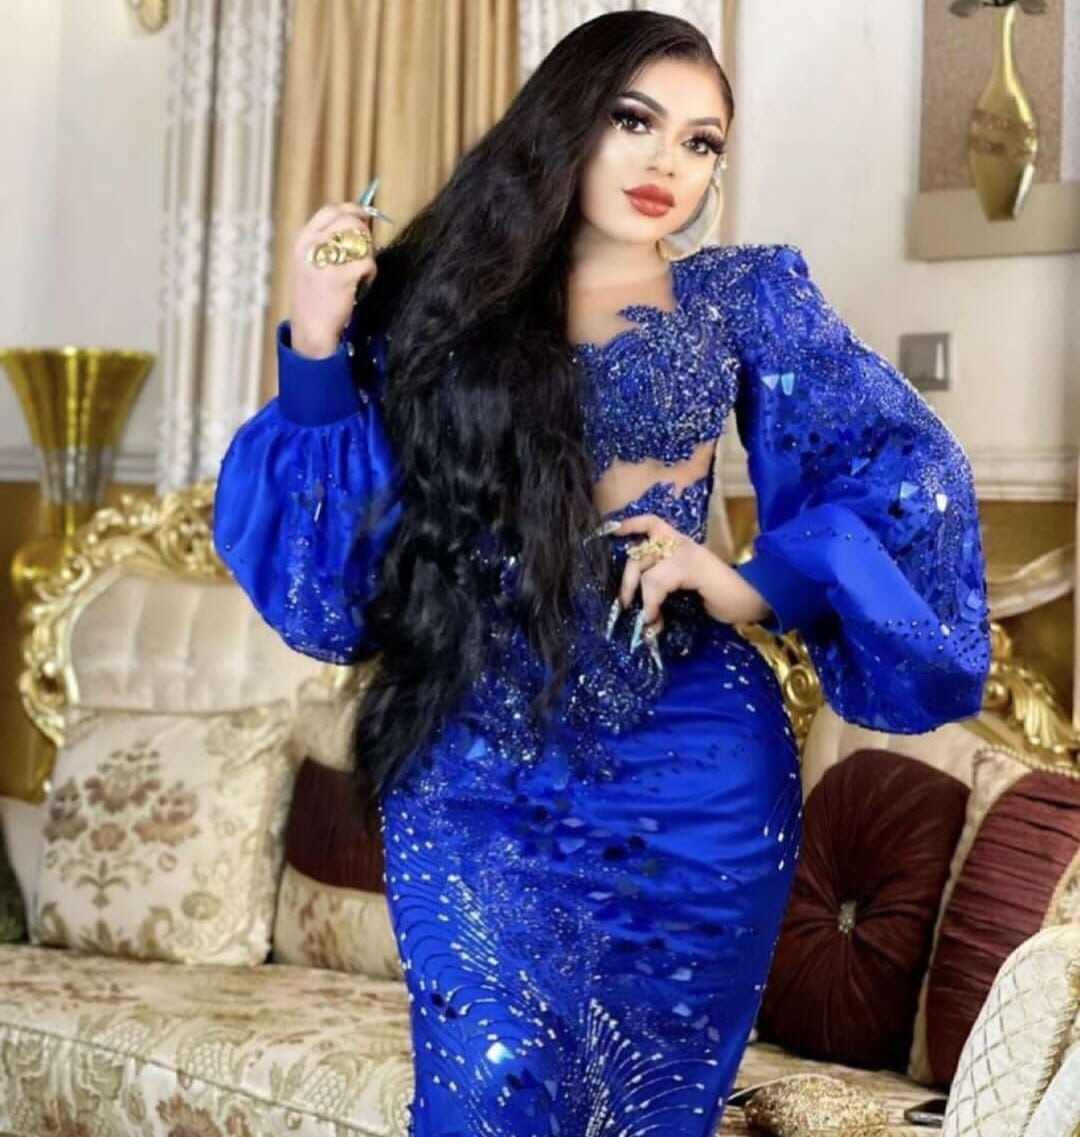 I have one purpose in life and it is to snatch people's husbands - Bobrisky